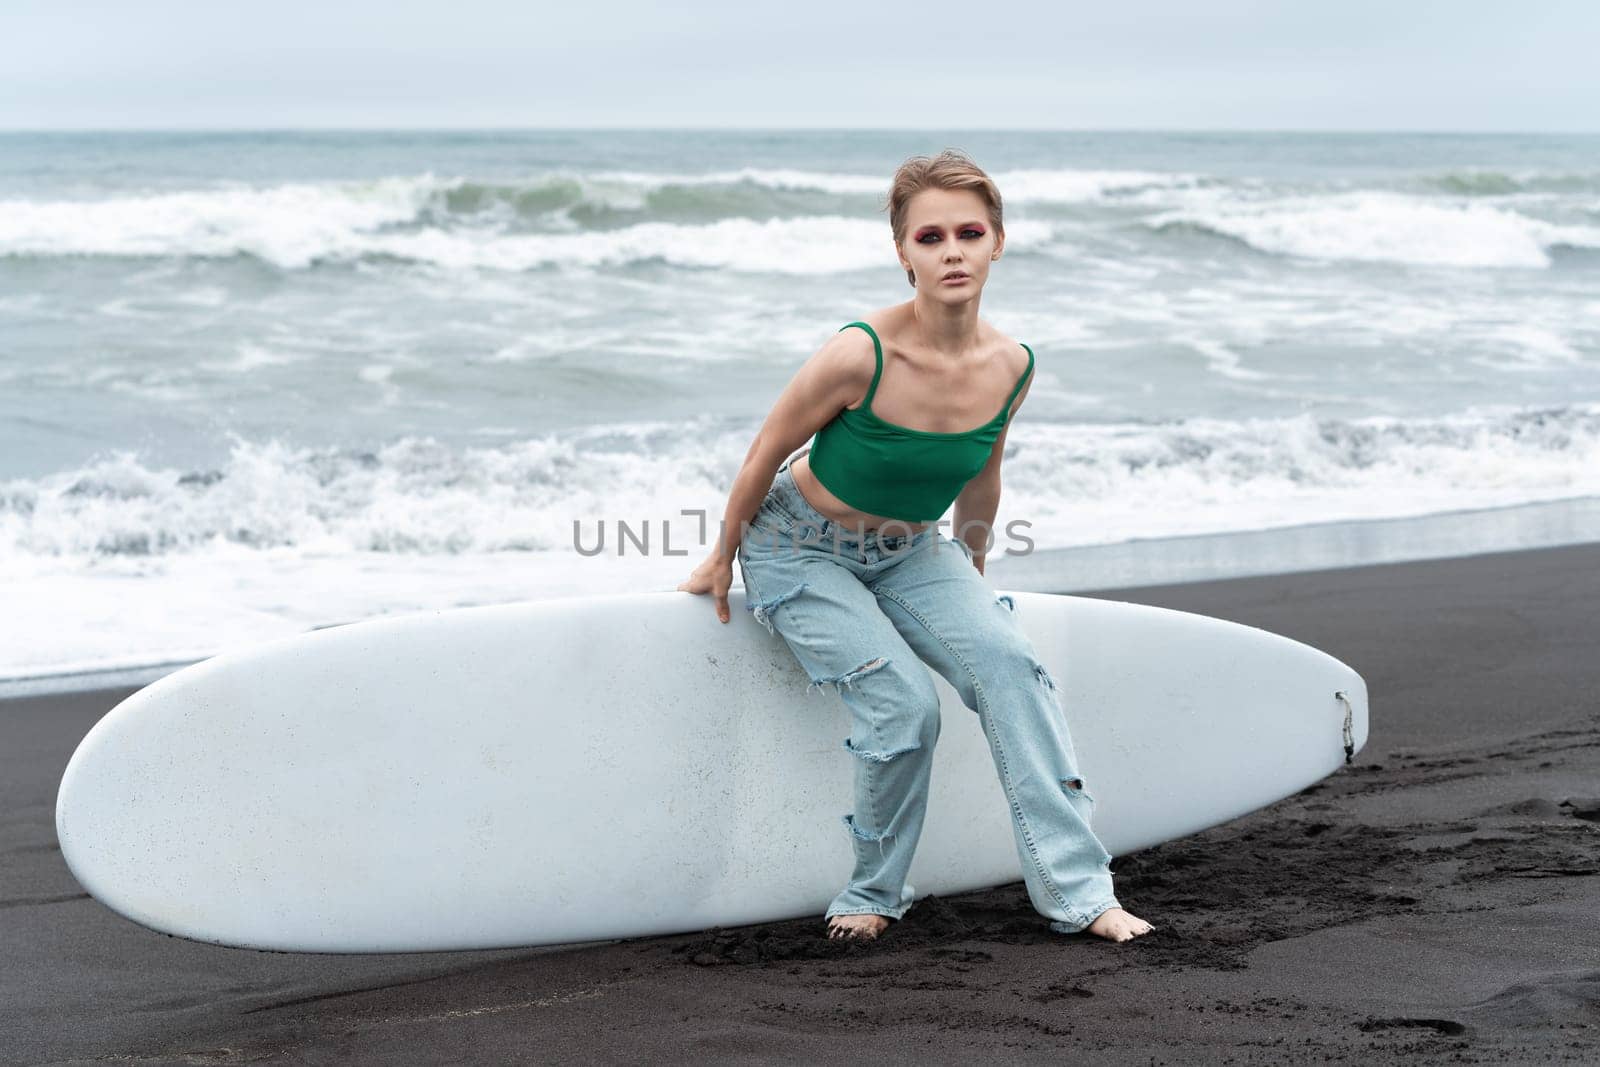 Sensual blonde woman sitting on surf board, lying on sand, against backdrop of pounding waves of Pacific Ocean. Authenticity Caucasian blonde model looking at camera, wearing top and blue jeans